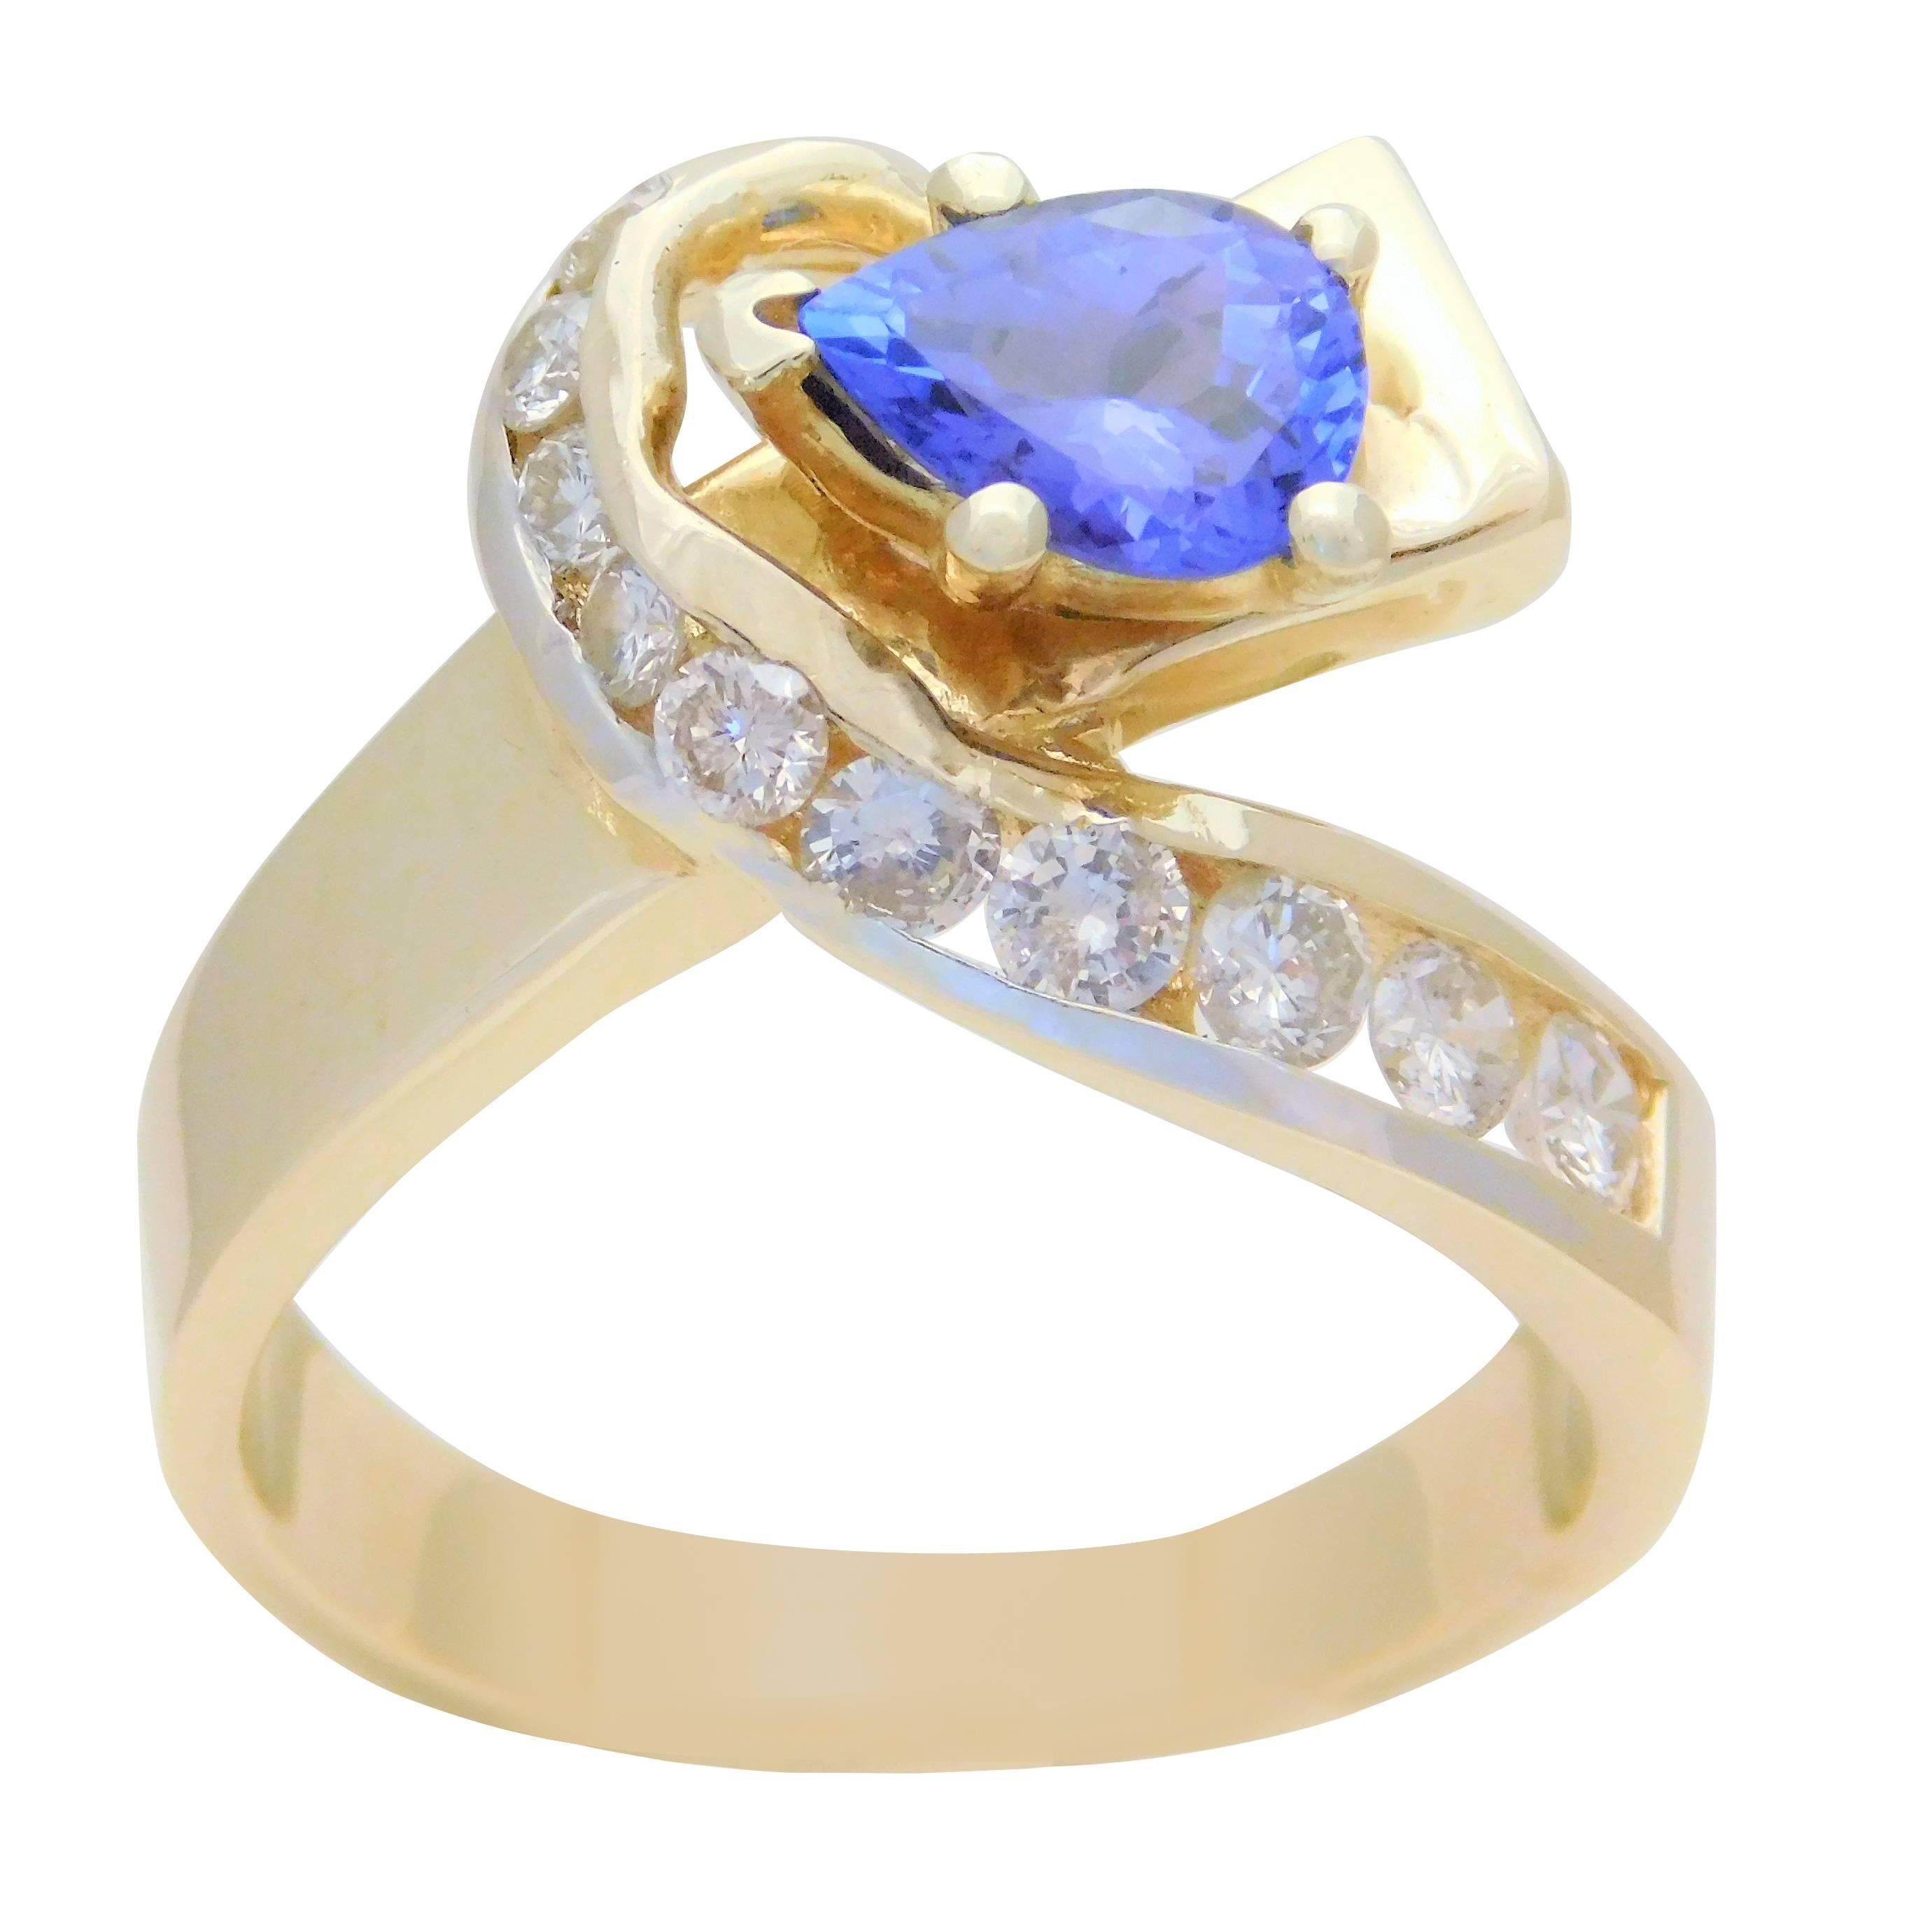 Vintage 2.05 Carat Pear-Cut Tanzanite and Diamond Cocktail Ring For Sale